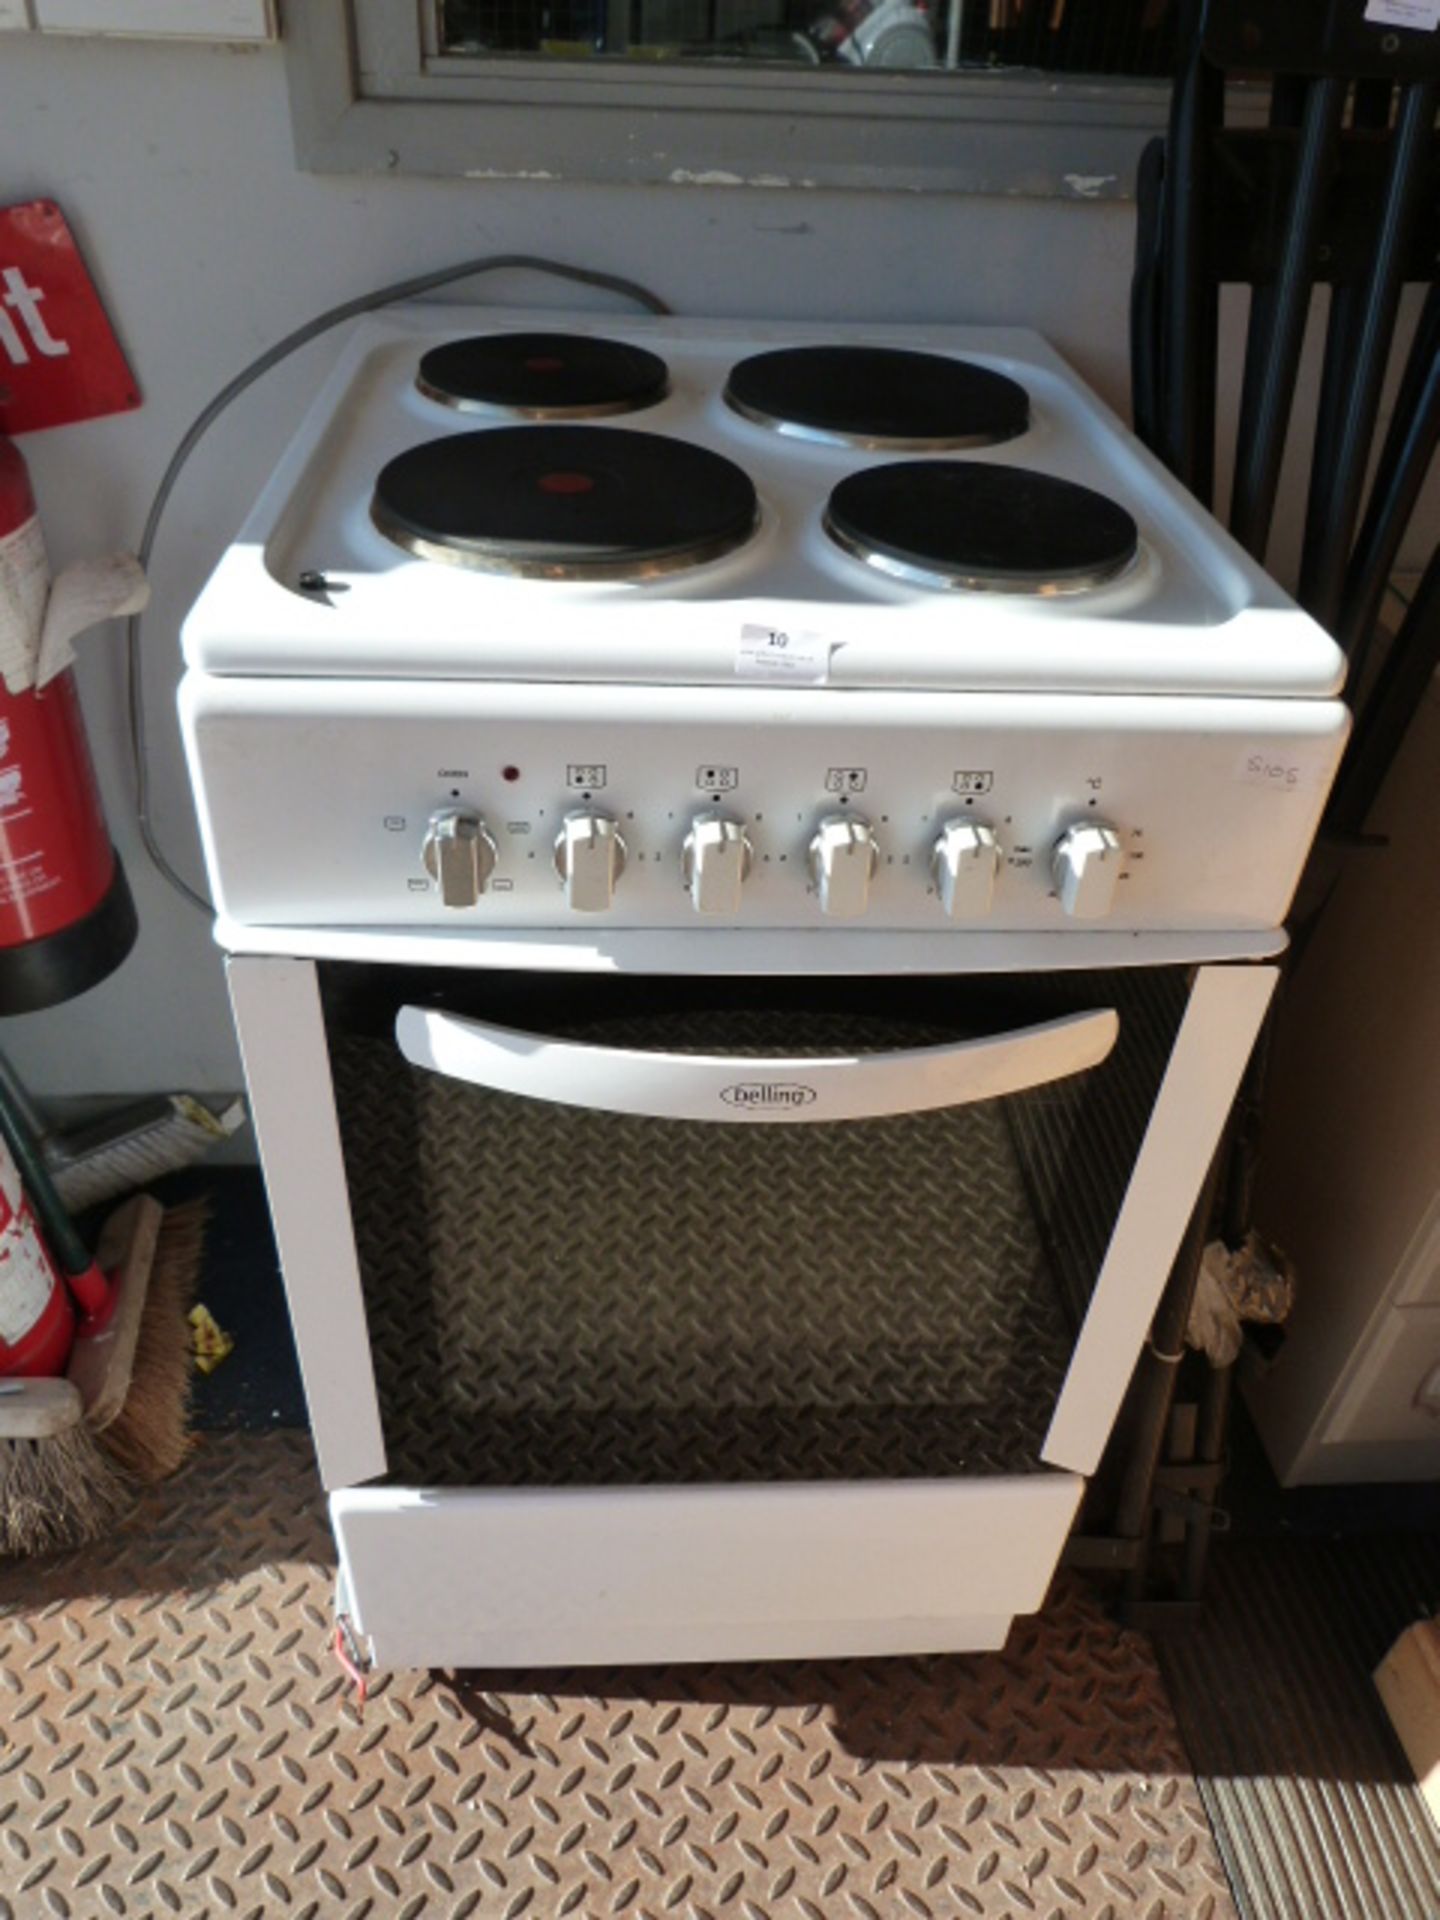 Belling Electric Cooker